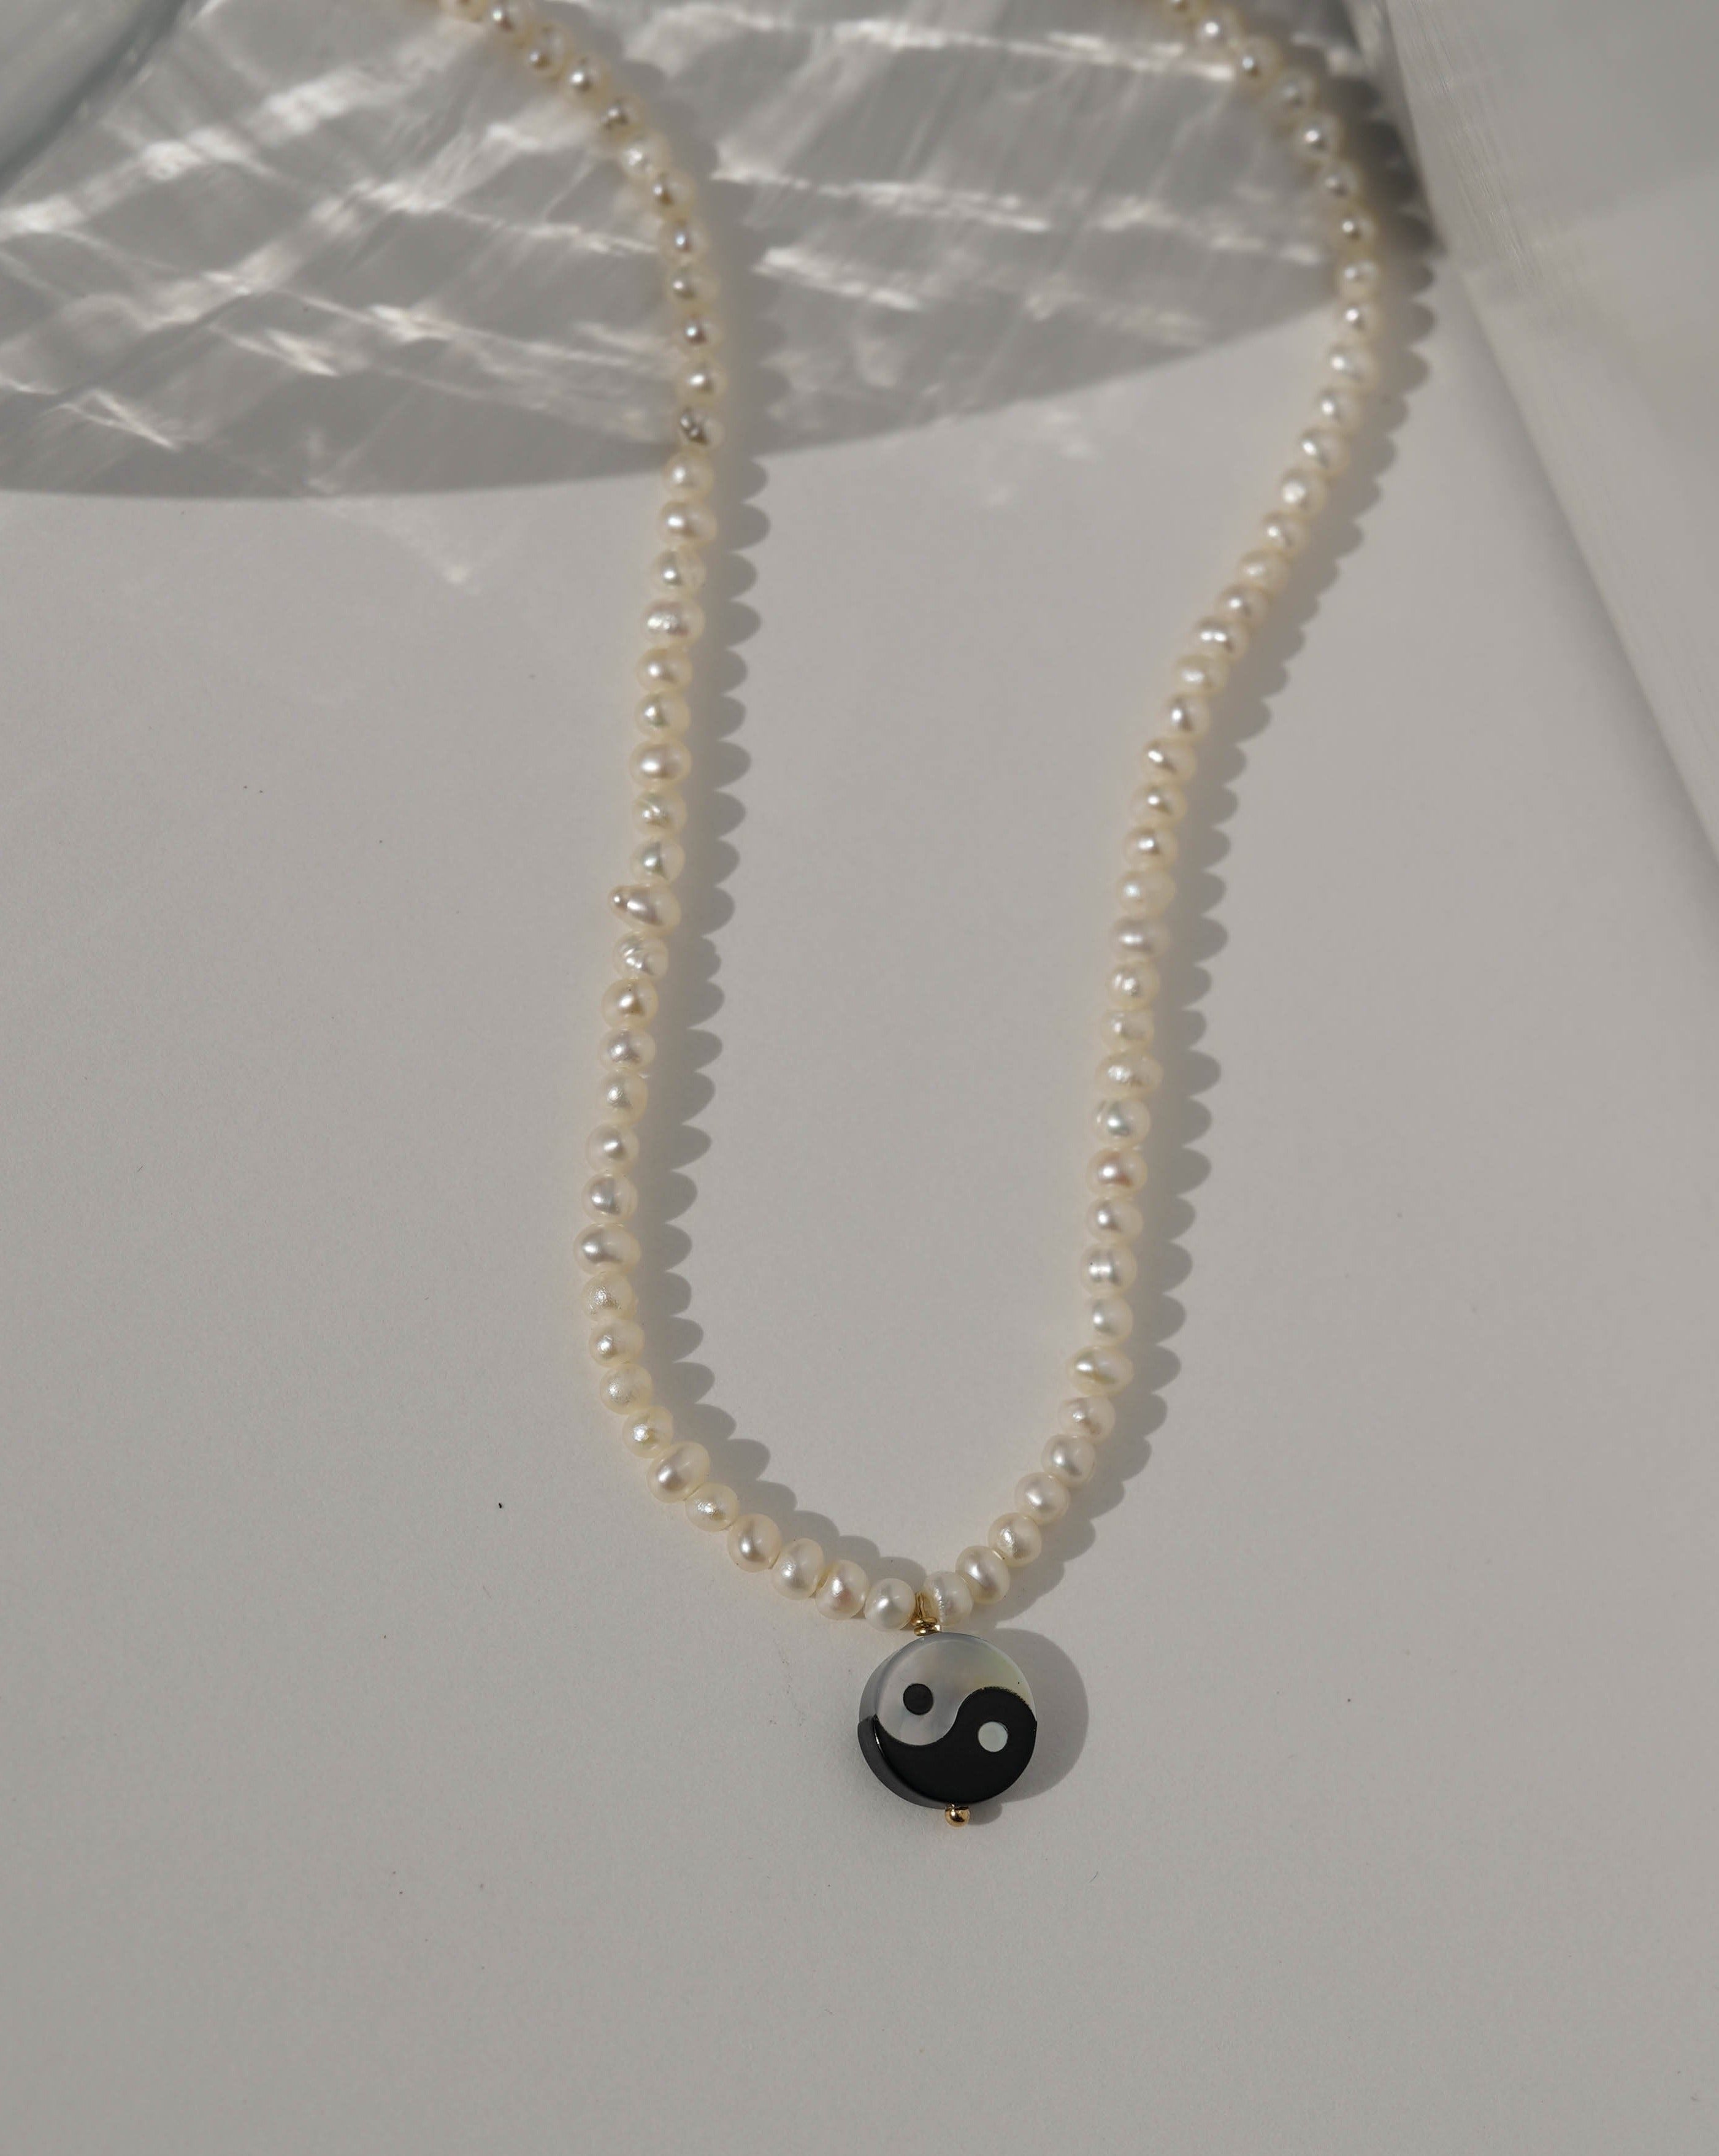 Yin Yang Pearl Necklace by KOZAKH. A 16 to 18 inch adjustable length necklace, with 16 inch strand of 3.5mm Freshwater Pearls, clasp crafted in 14K Gold Filled, featuring a hand carved Mother of pearl Yin Yang charm.